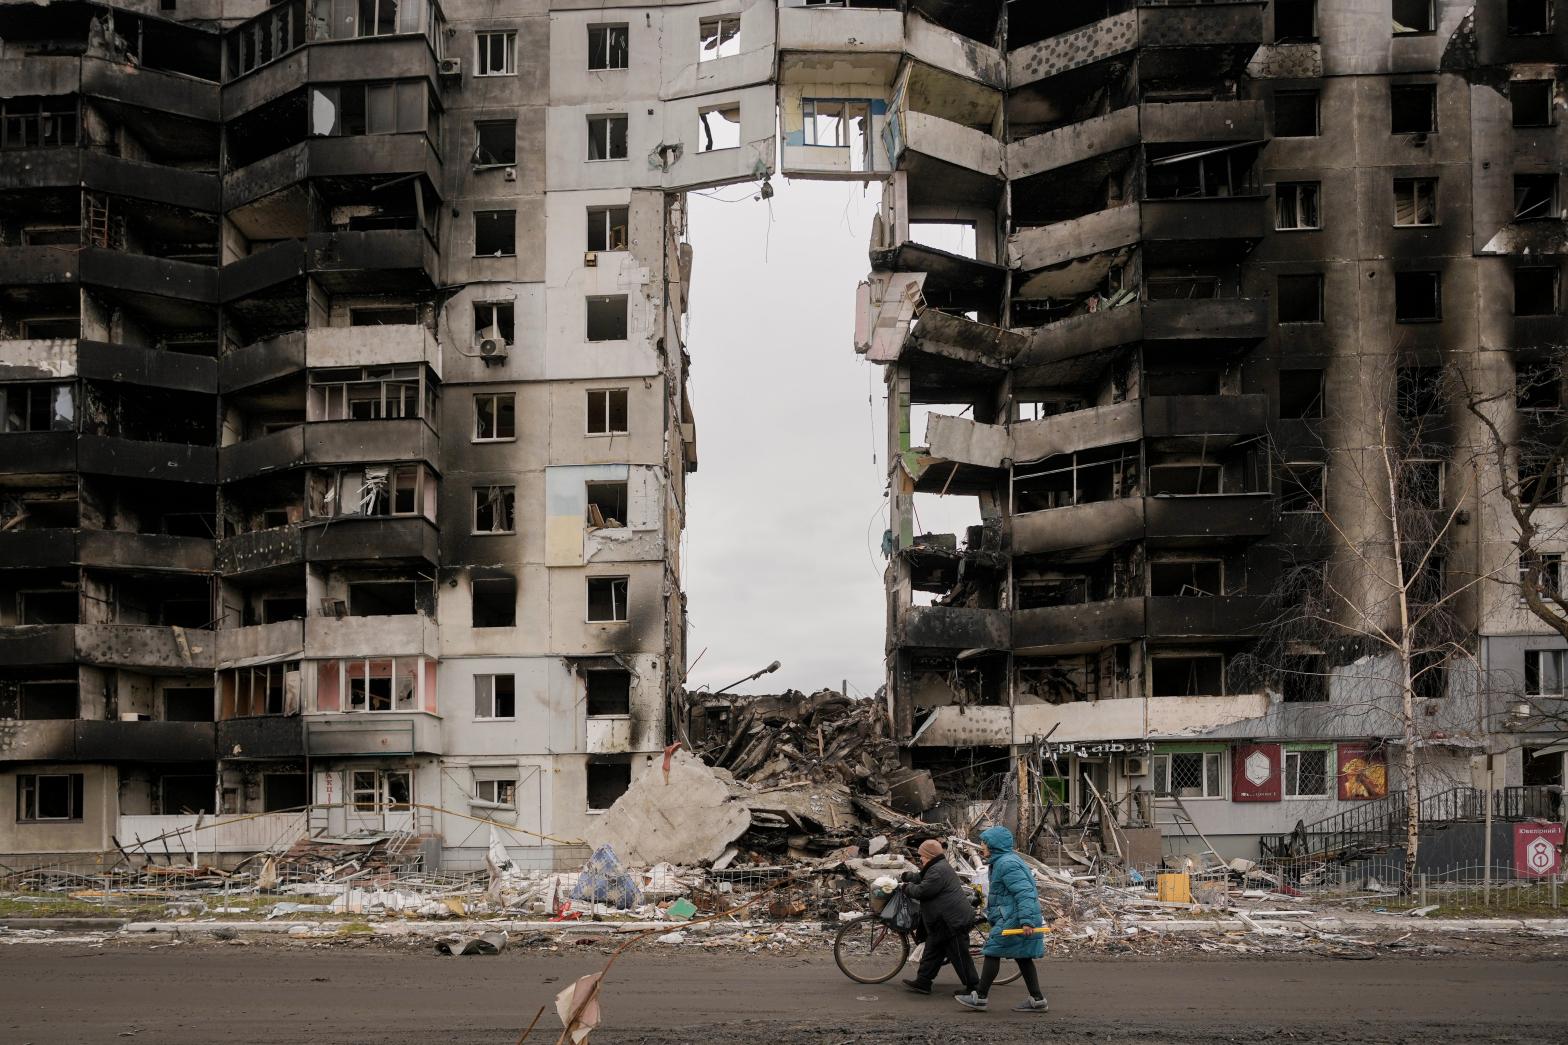 Women carrying food products walk by a destroyed apartment building in Borodyanka, on the outskirts of Kyiv, Ukraine in an area where officials said there were numerous examples of Russian war crimes. (Photo: Vadim Ghirda, AP)